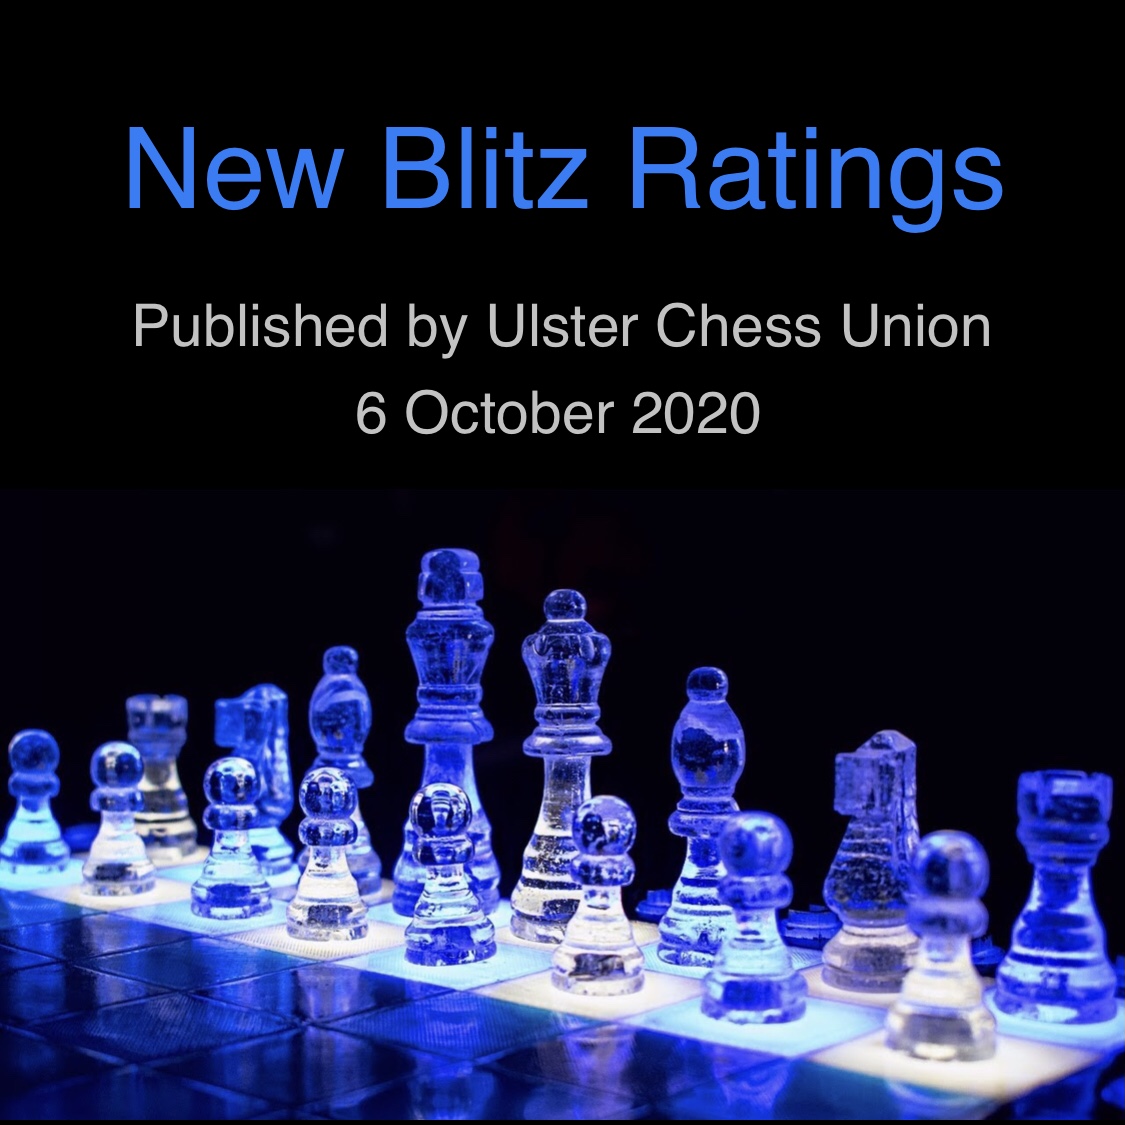 Open Air Chess Delivers New Blitz Ratings